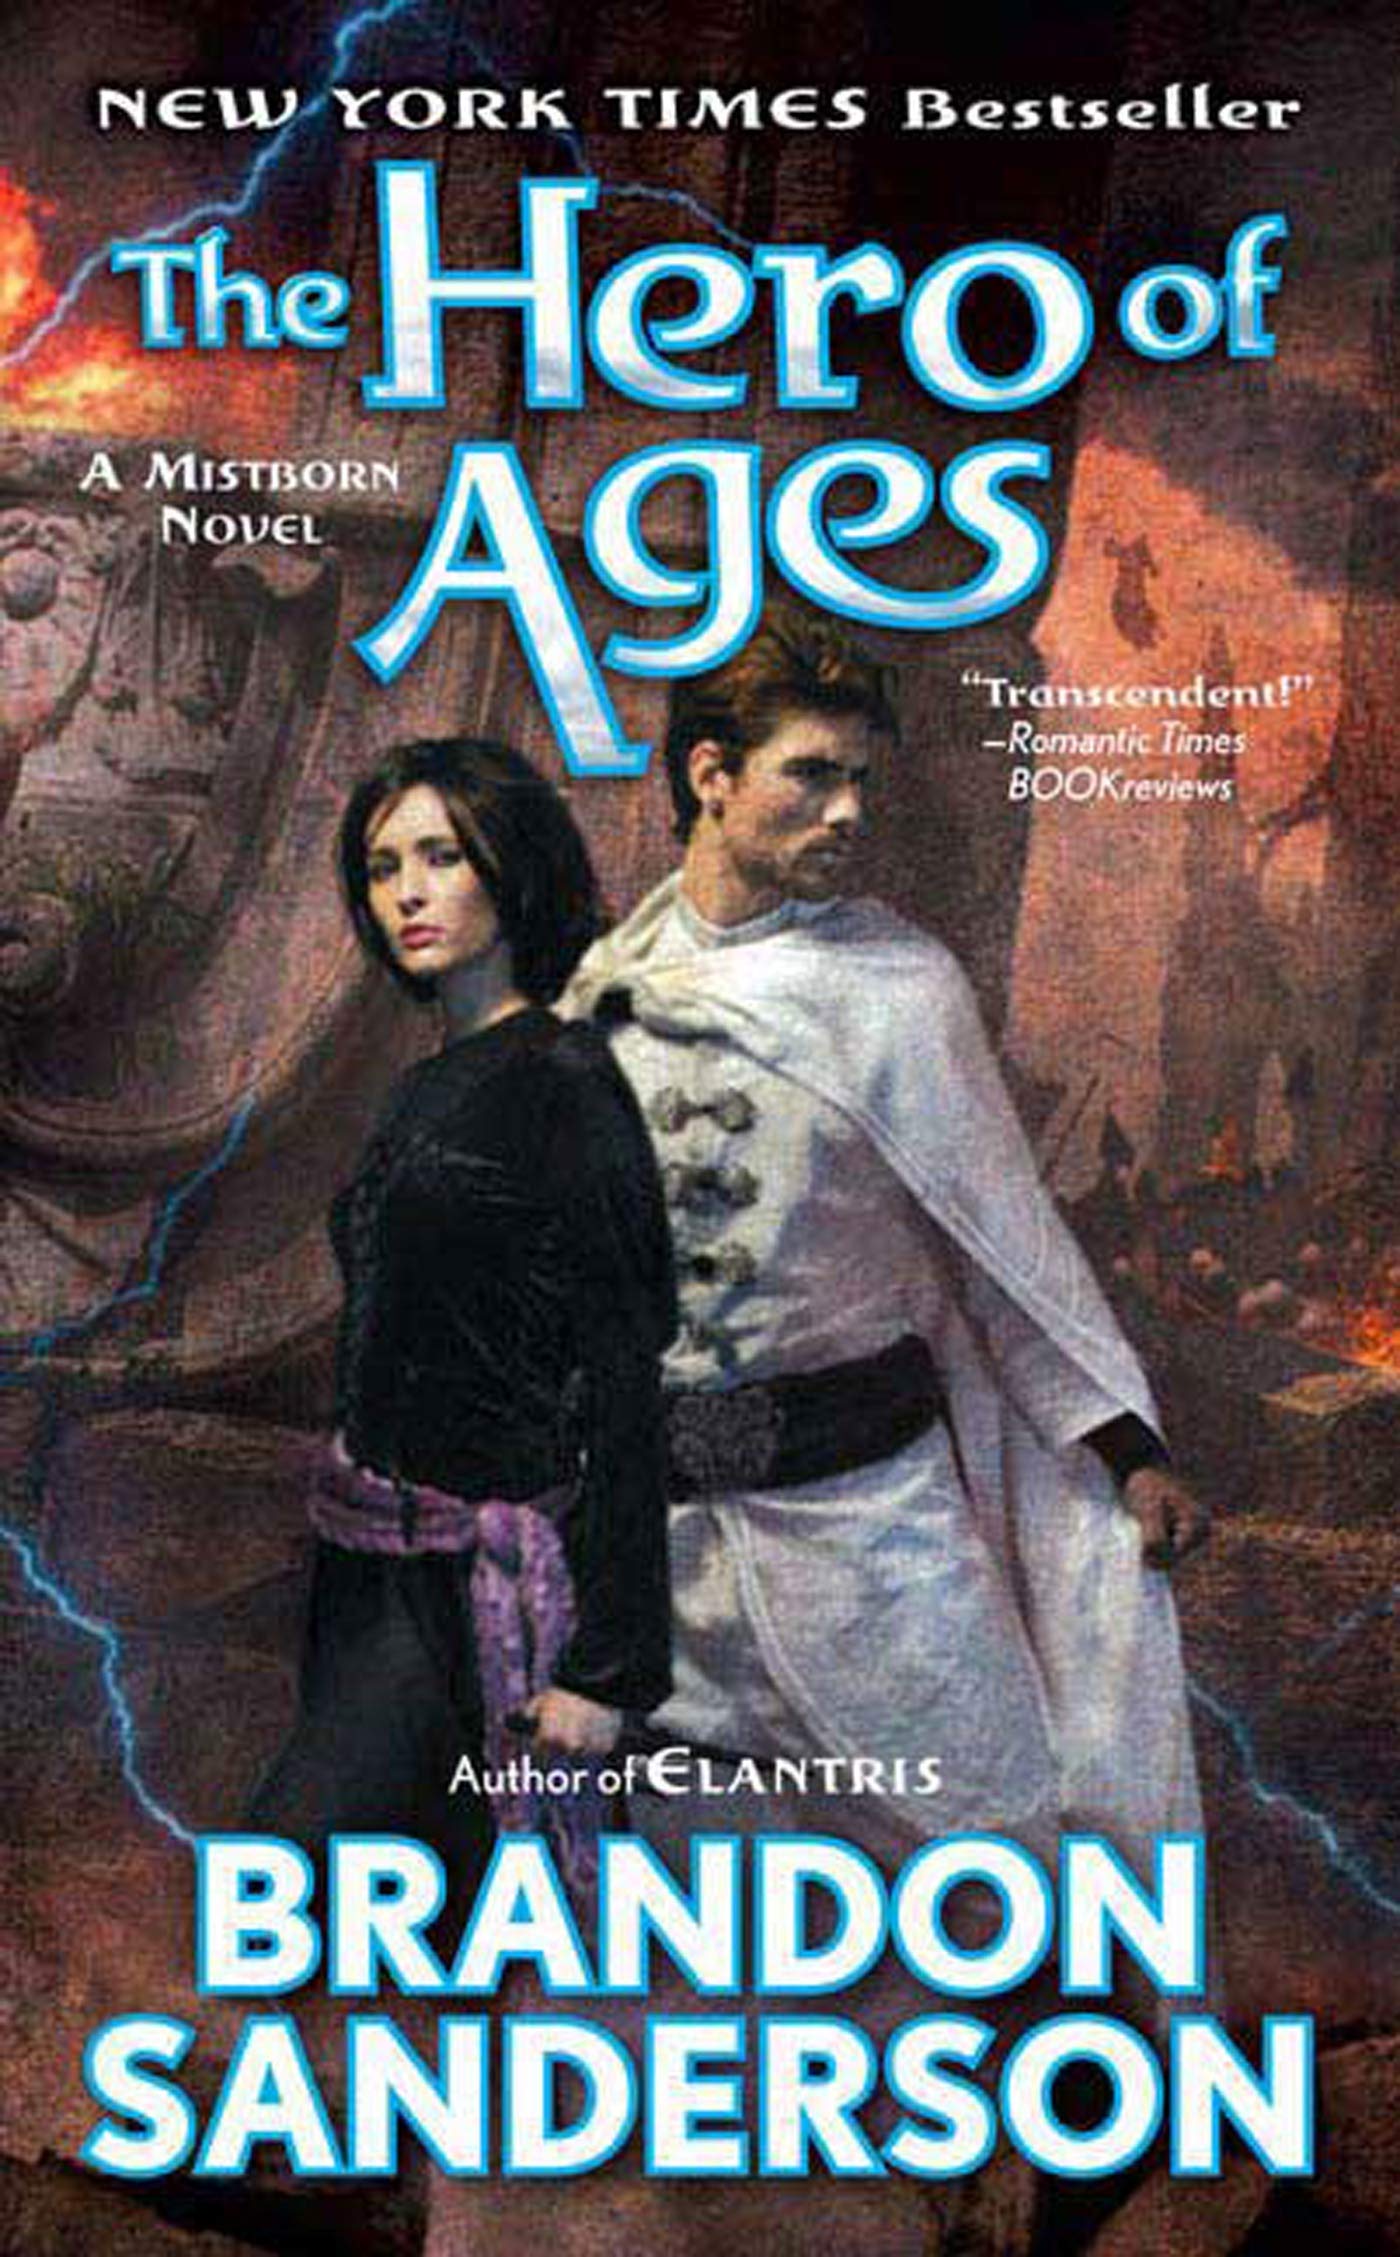 The Mistborn 3:The Hero of Ages - Booksondemand